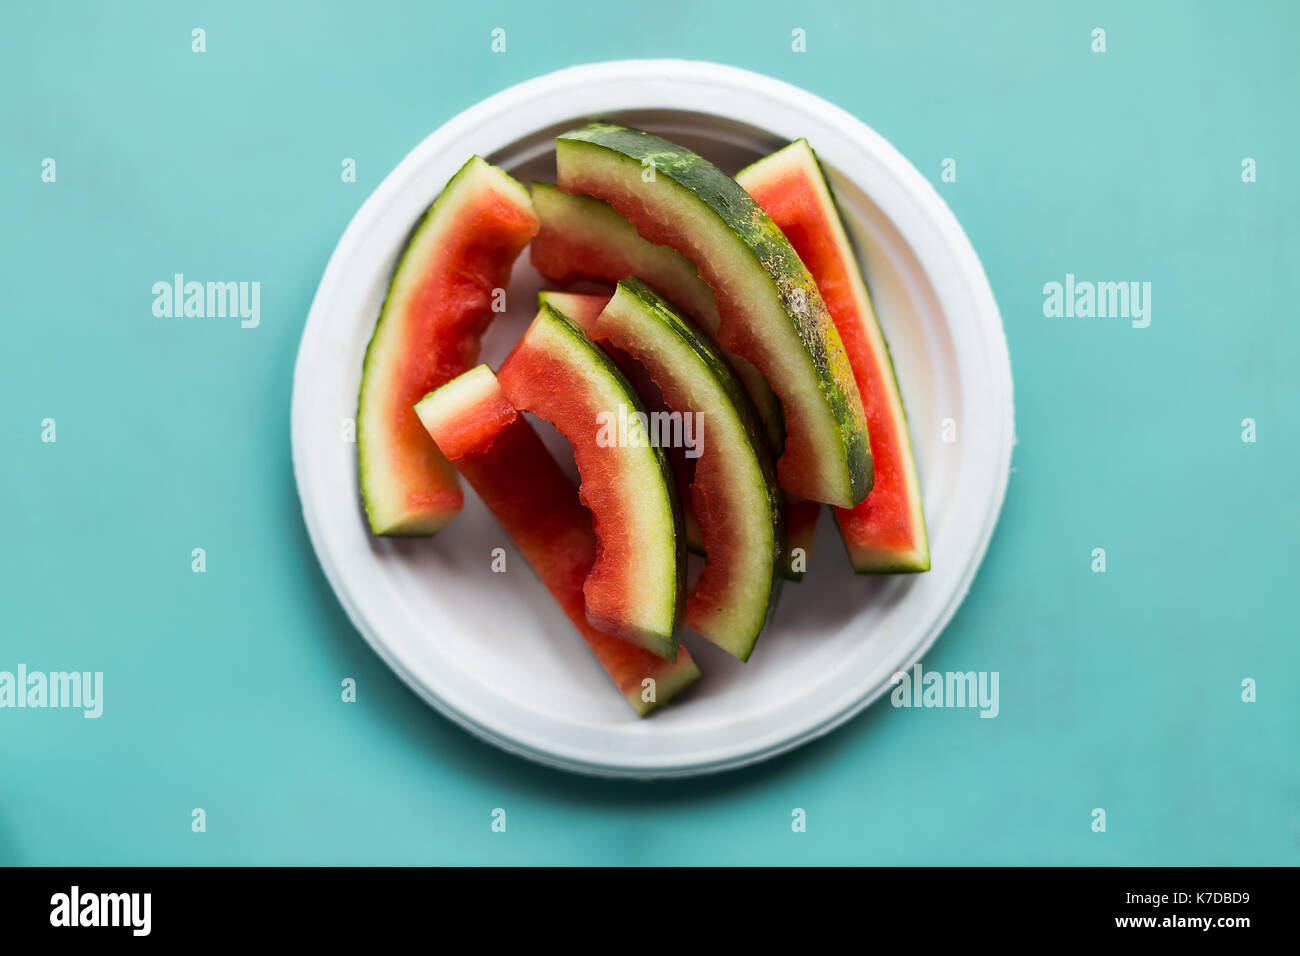 Overhead view of eaten watermelon slices in plate on table Stock Photo